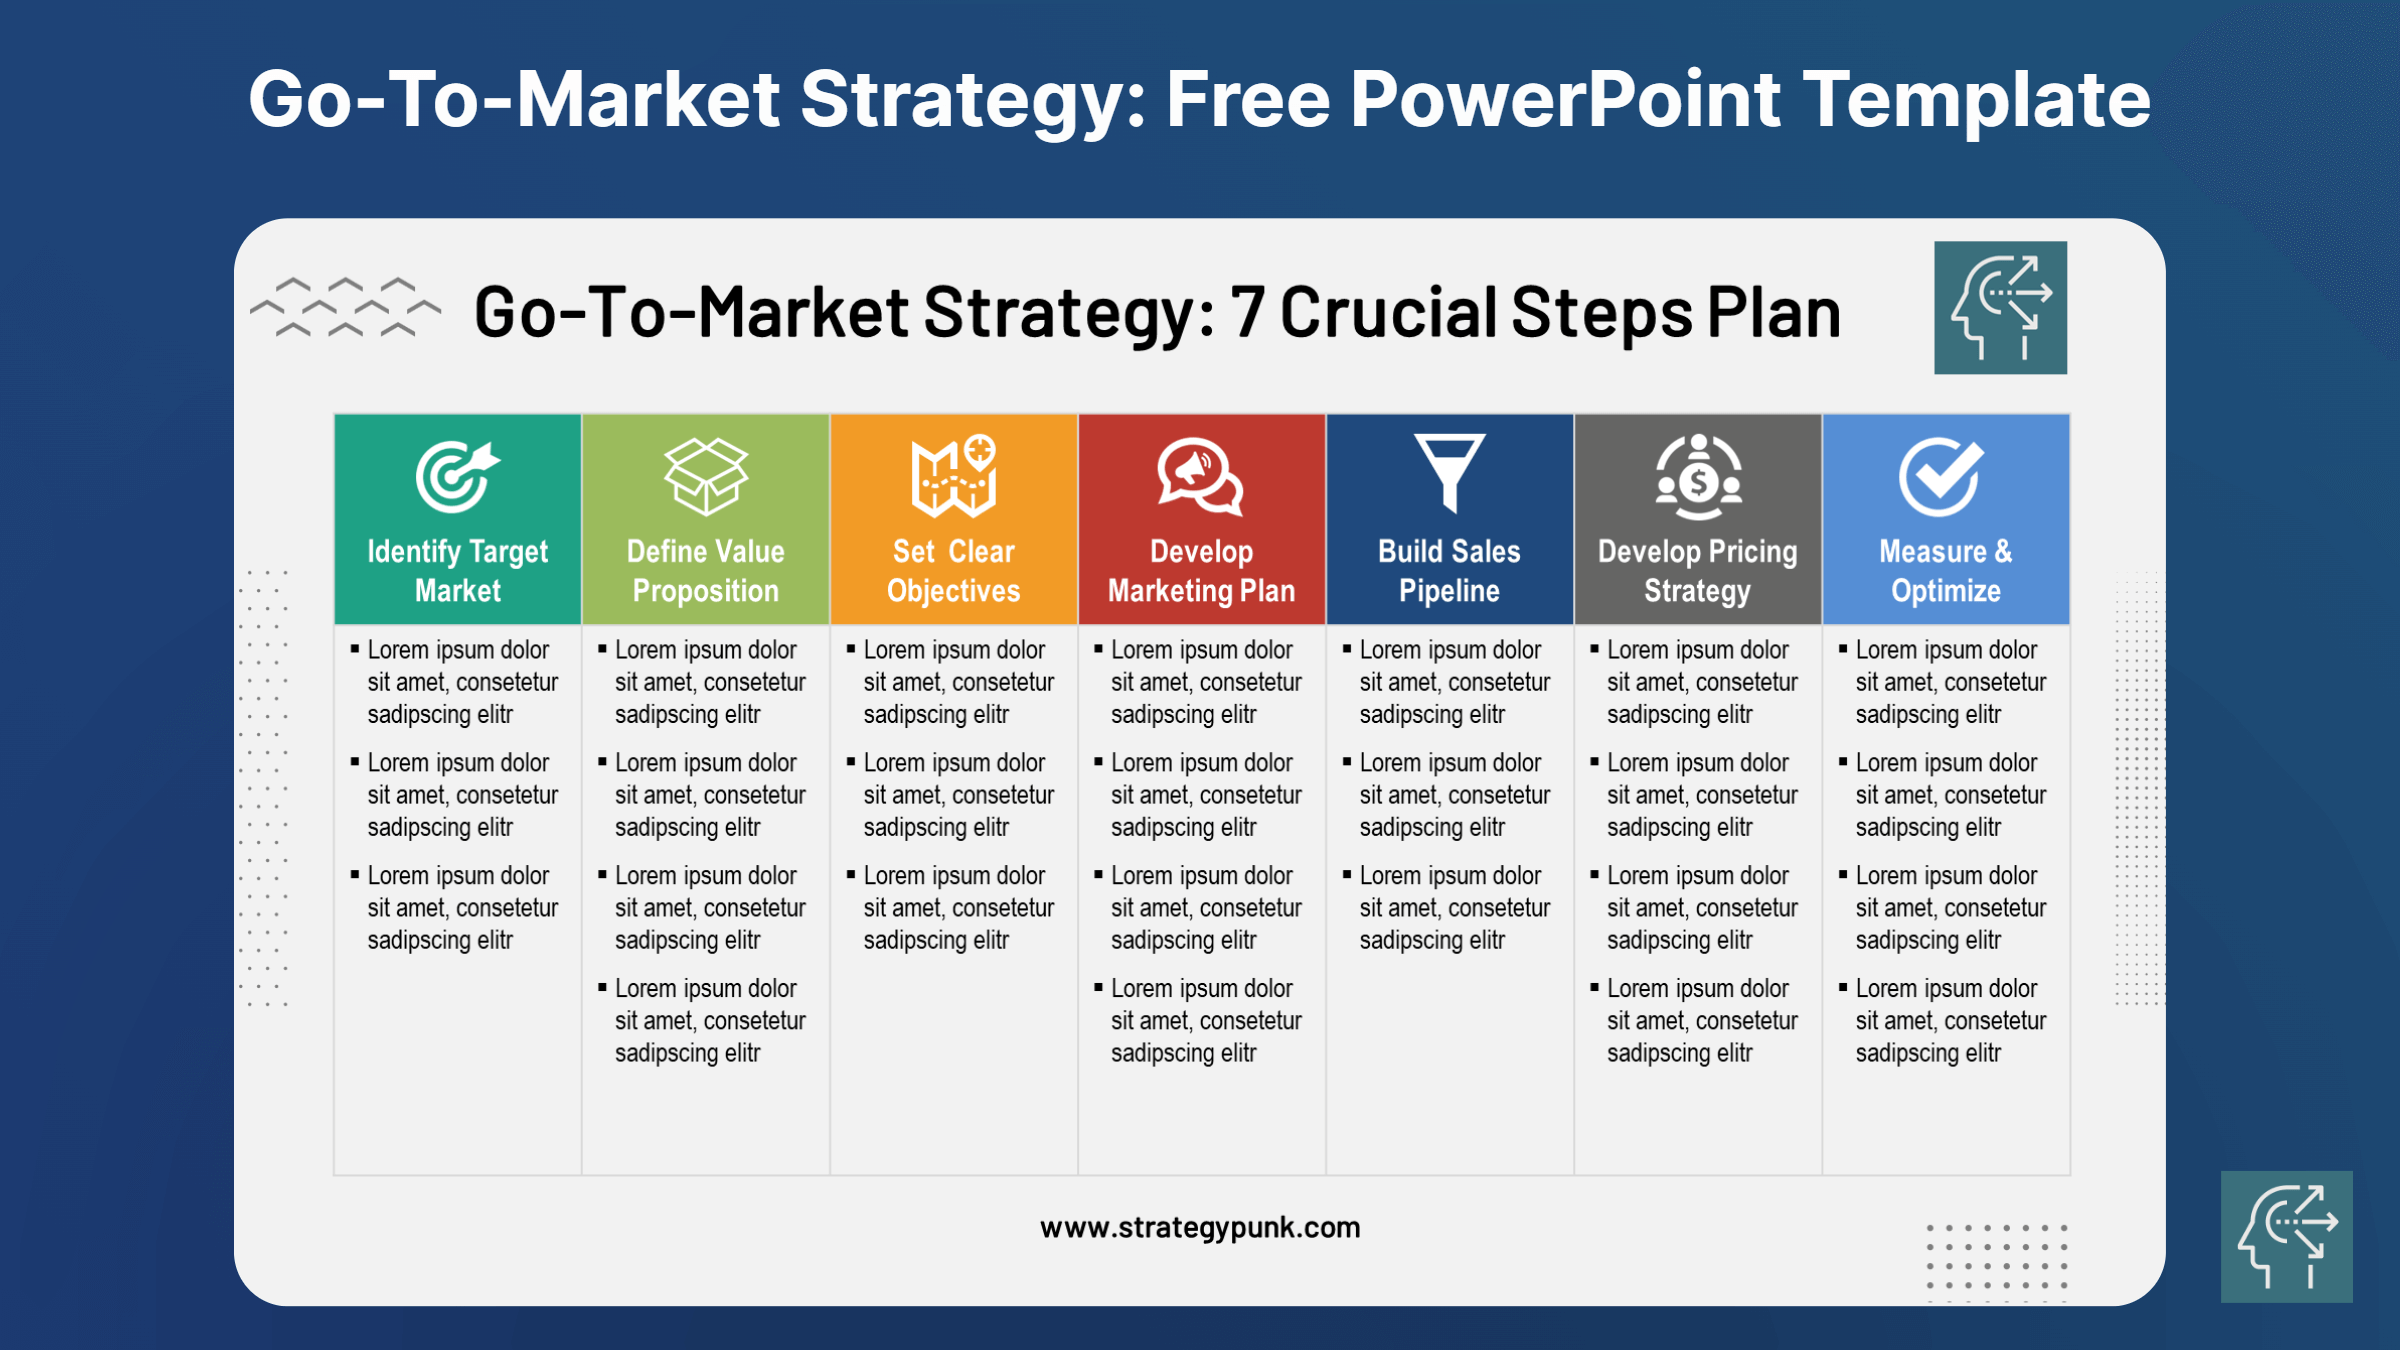 Mastering Your Go-To-Market Strategy: 7 Crucial Steps for Success (Plus Free PPT Template)